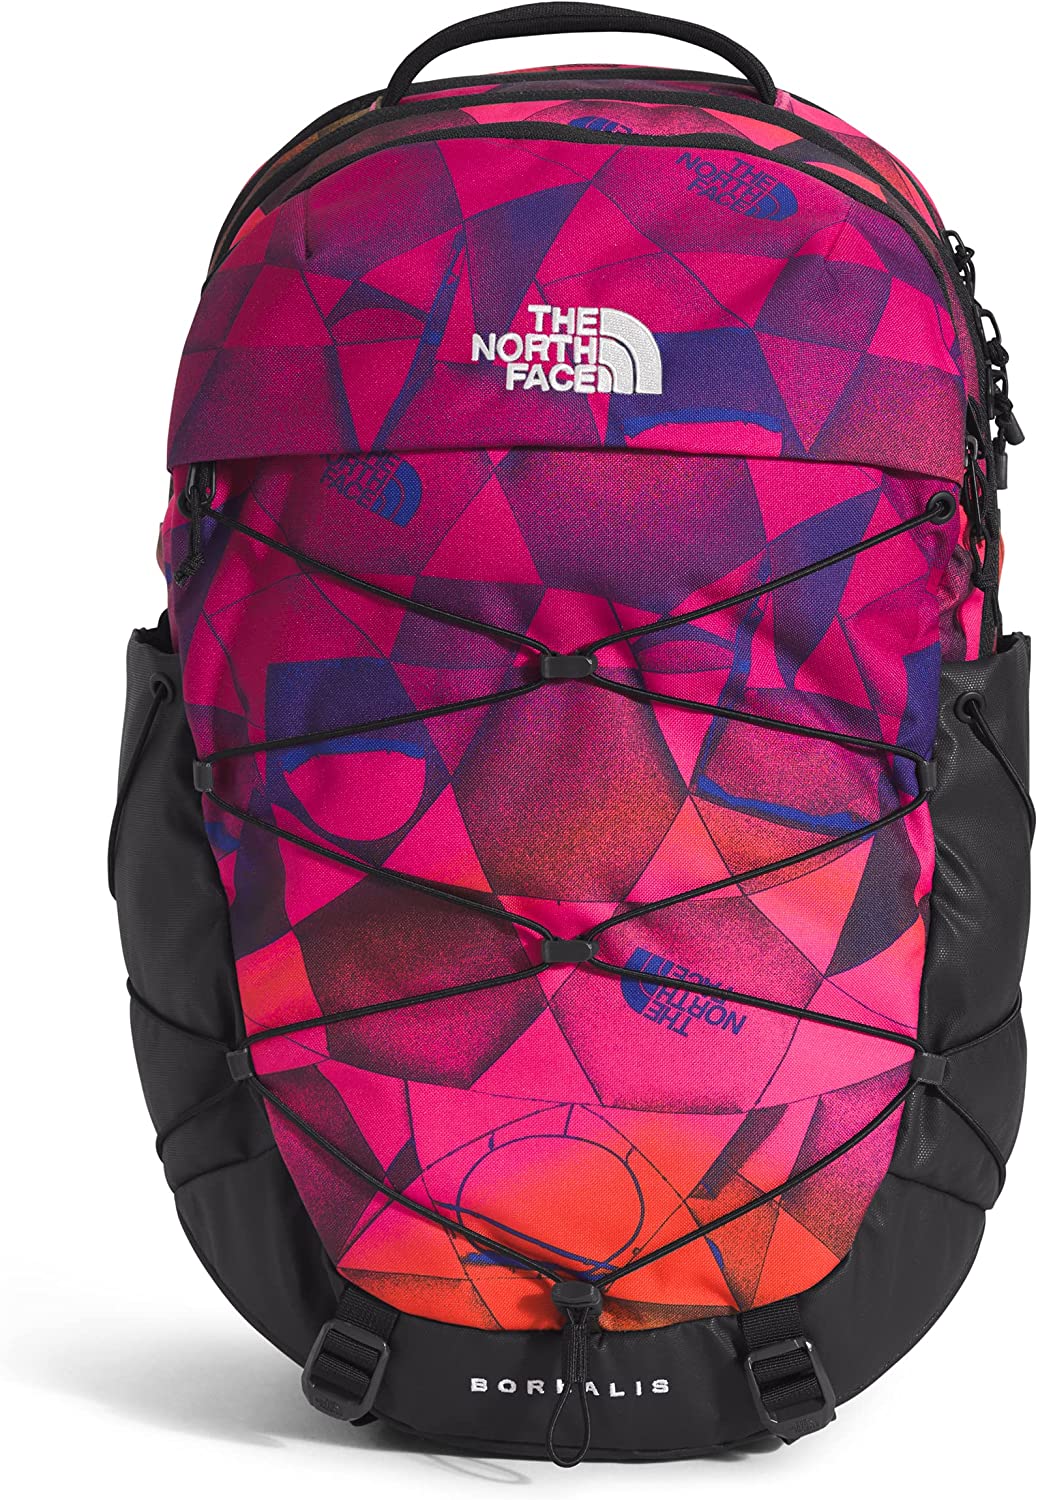 The North Face Unisex Borealis Backpack, One Size, Tnf Black